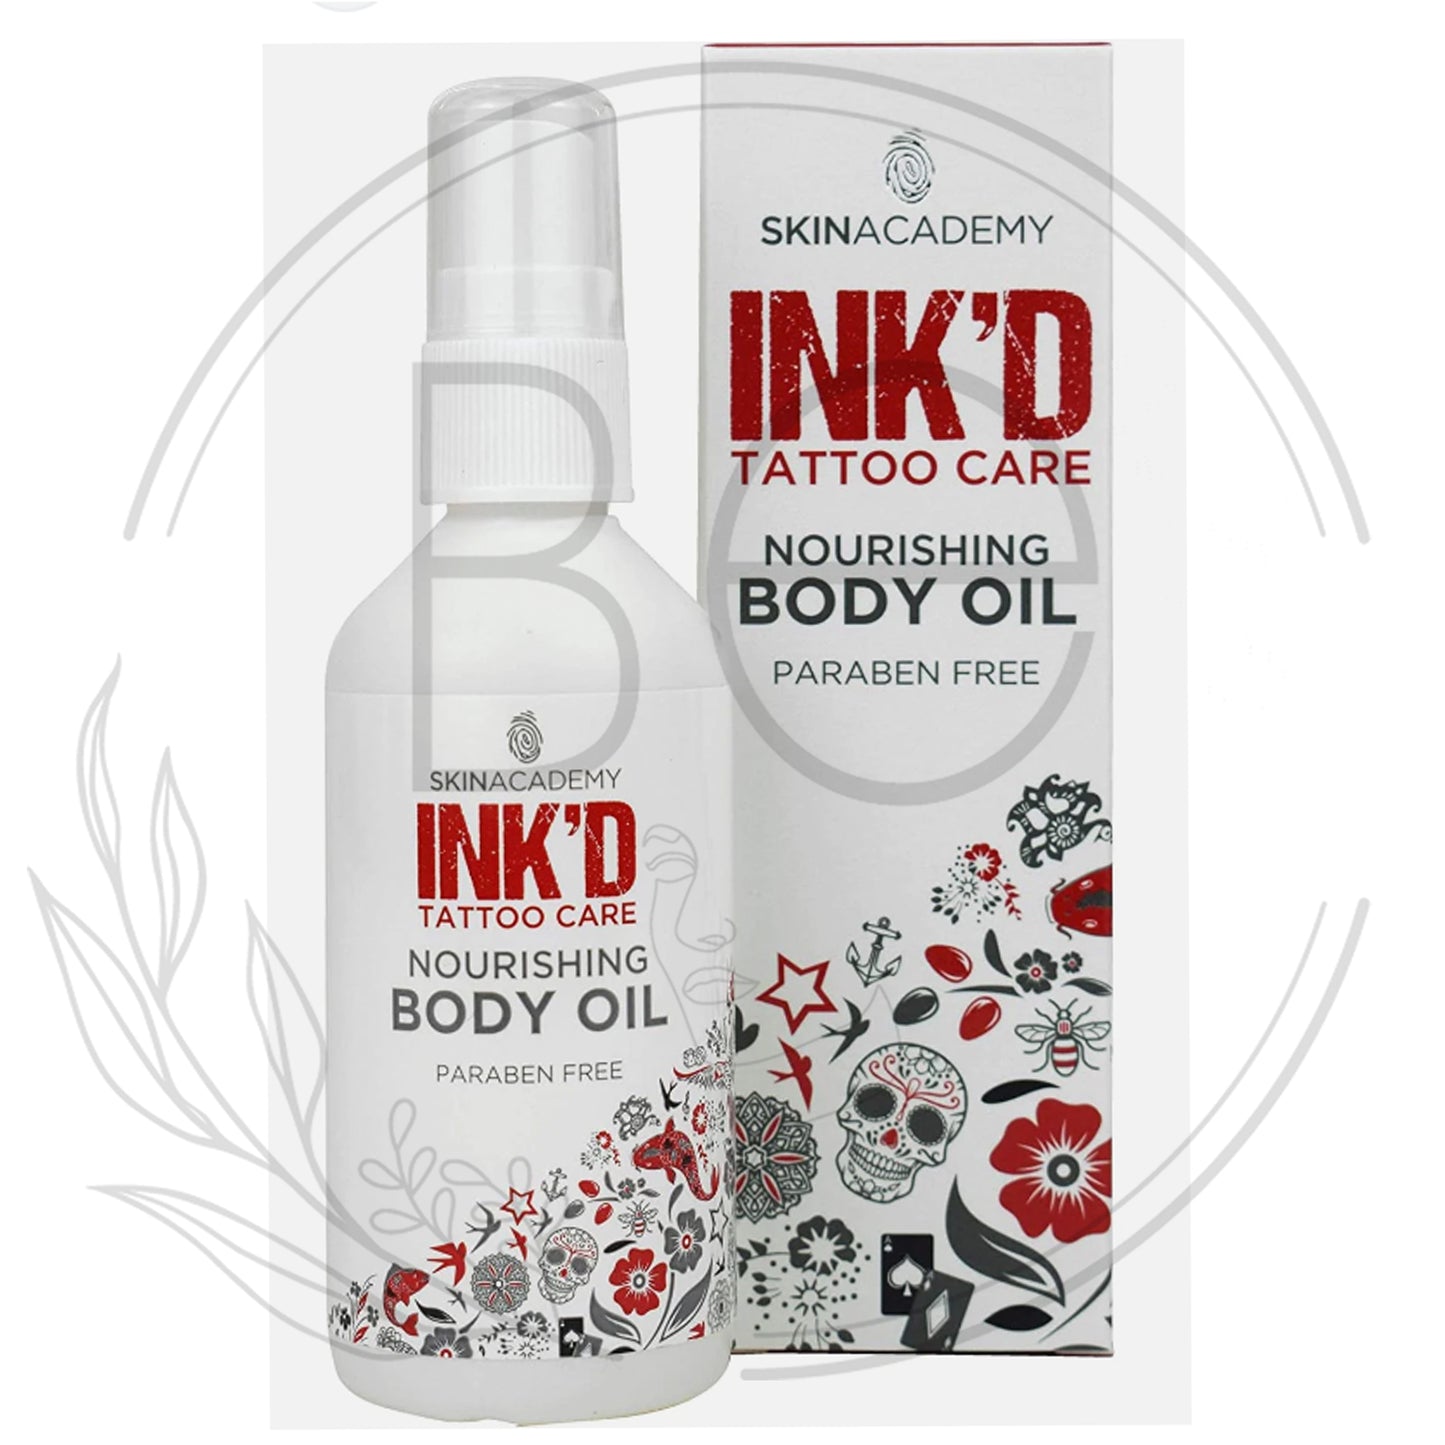 Skin Academy Ink'd Vegan Tattoo Care Hydrating Serum and Oil